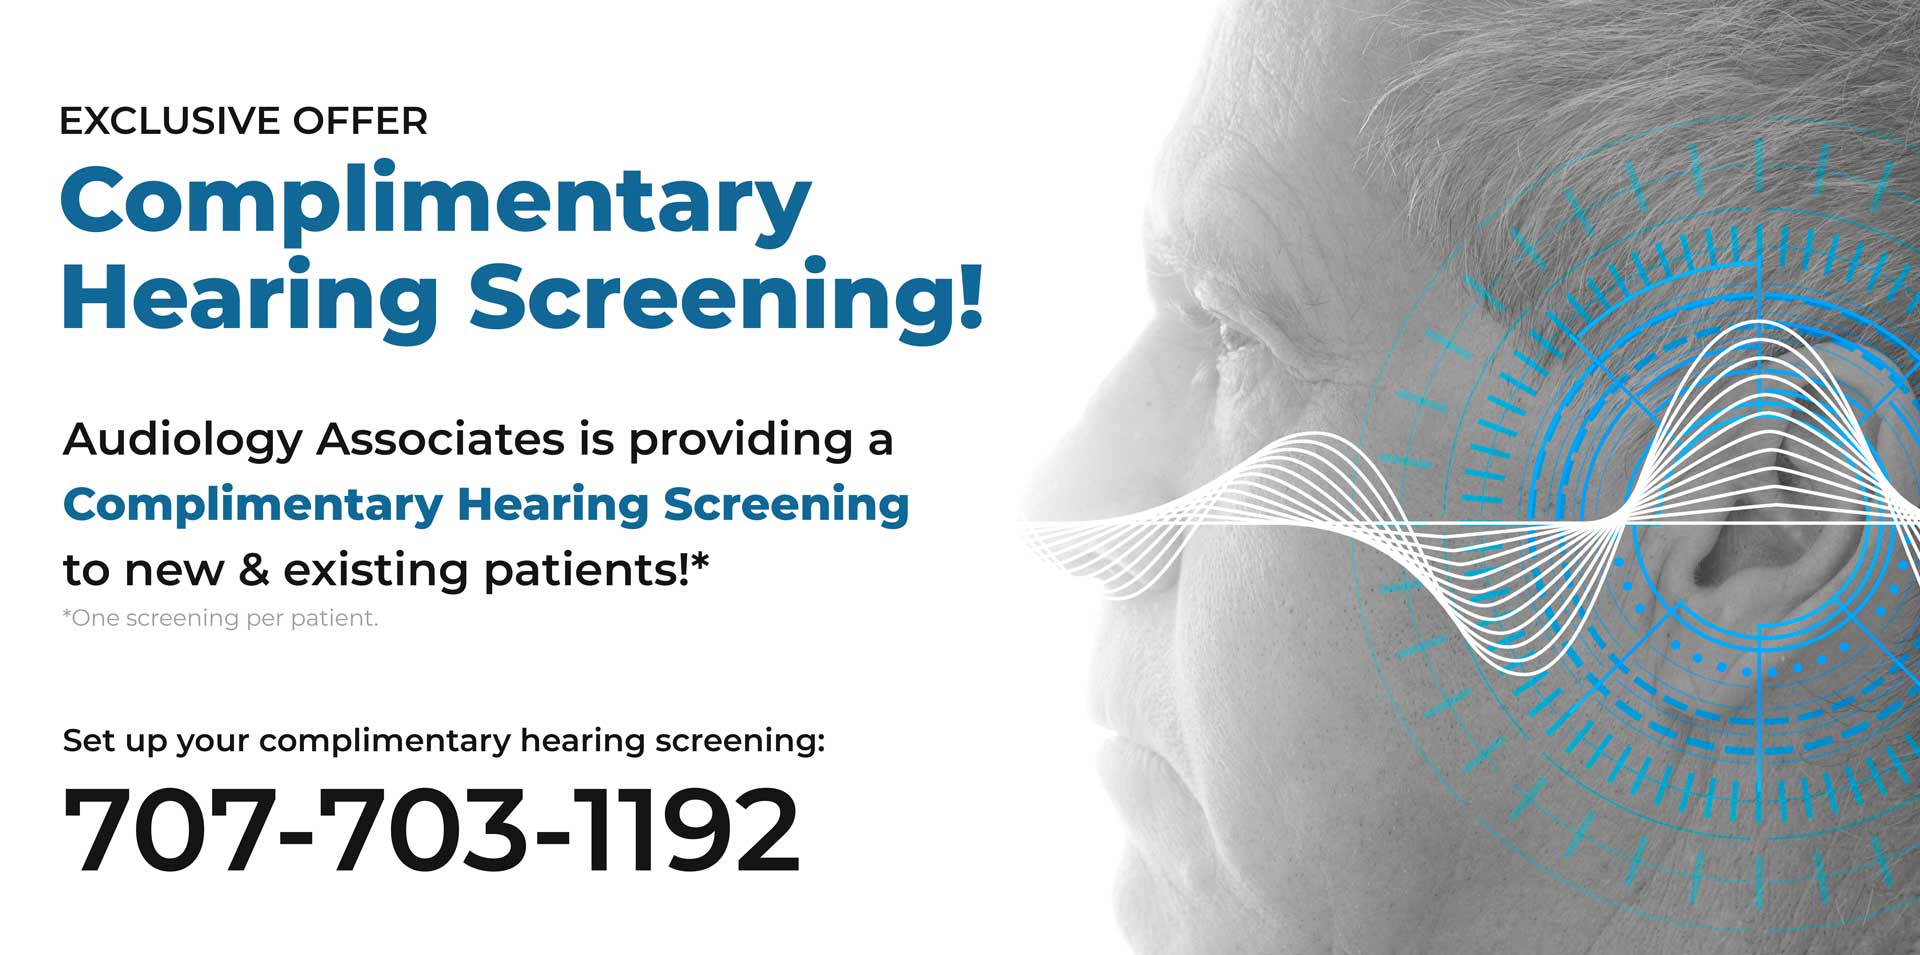 Complimentary Hearing Screening: 707-703-1192